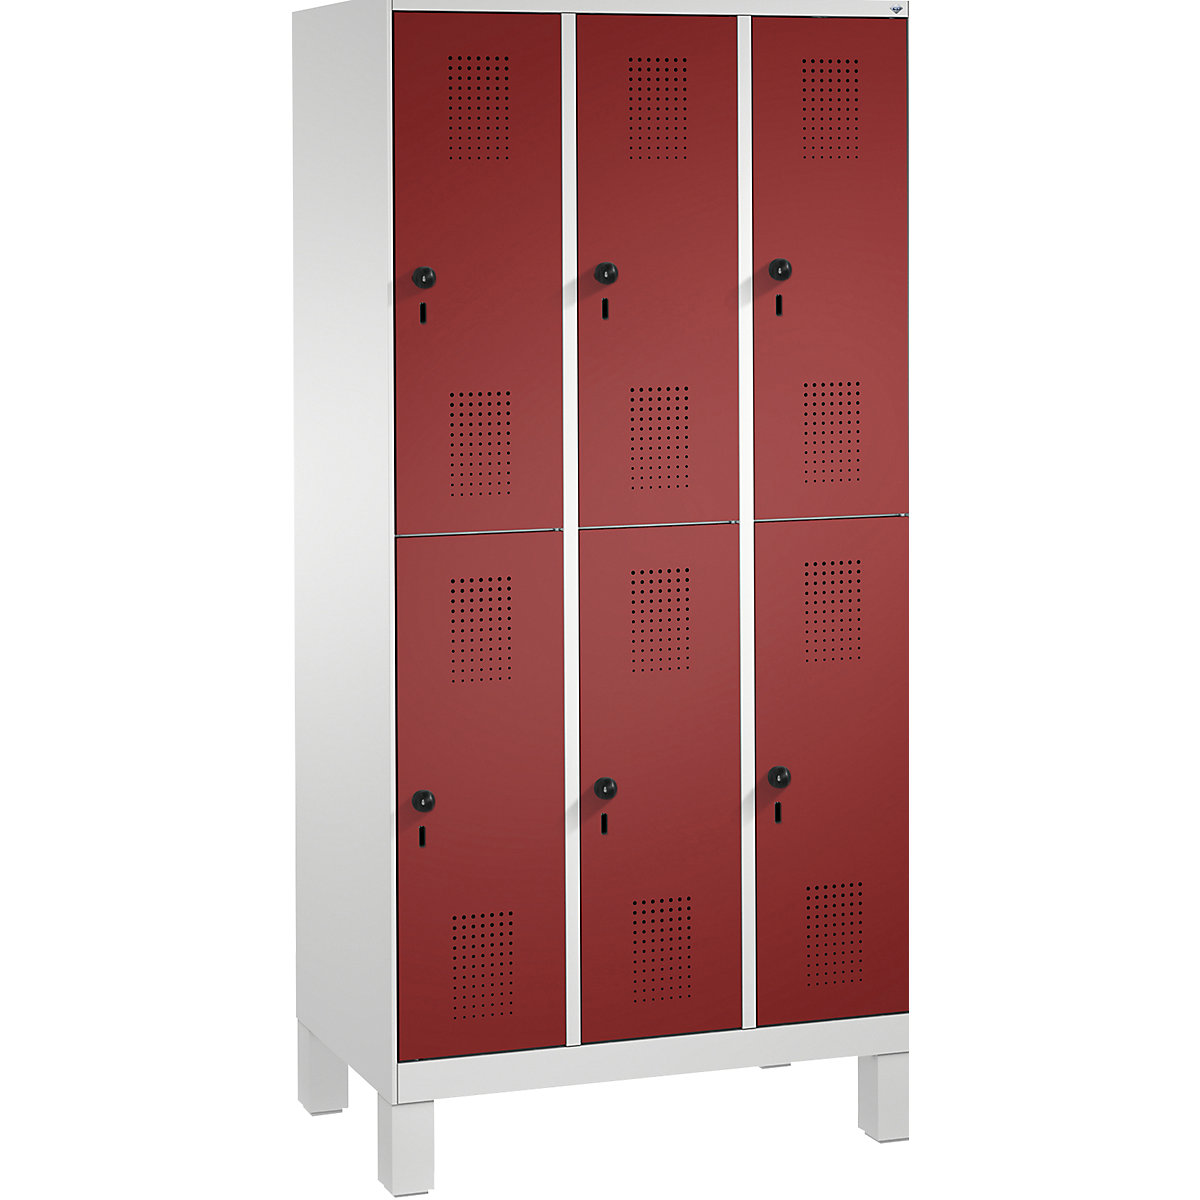 EVOLO cloakroom locker, double tier, with feet – C+P, 3 compartments, 2 shelf compartments each, compartment width 300 mm, light grey / ruby red-3